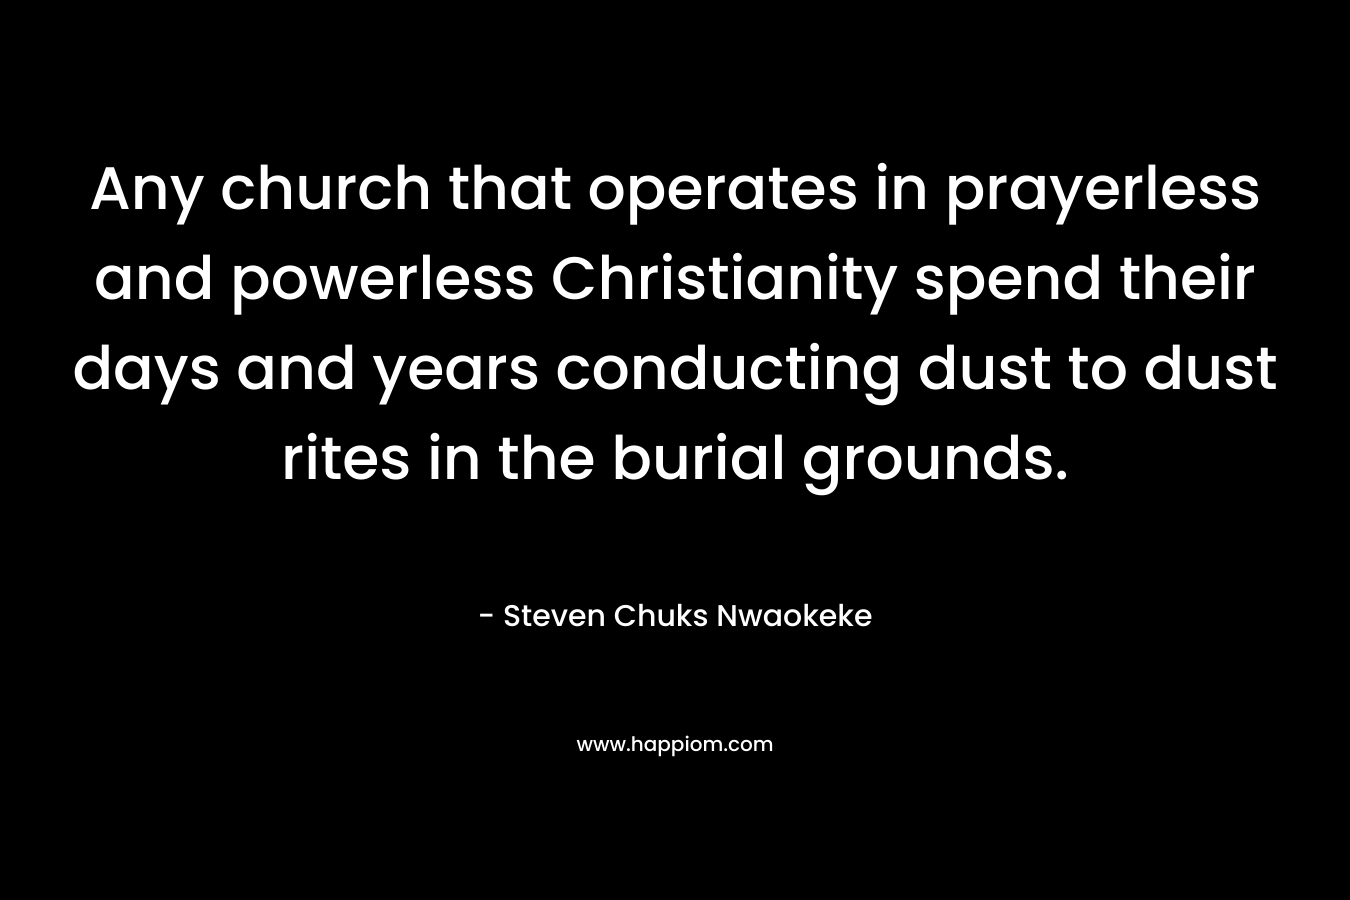 Any church that operates in prayerless and powerless Christianity spend their days and years conducting dust to dust rites in the burial grounds. – Steven Chuks Nwaokeke